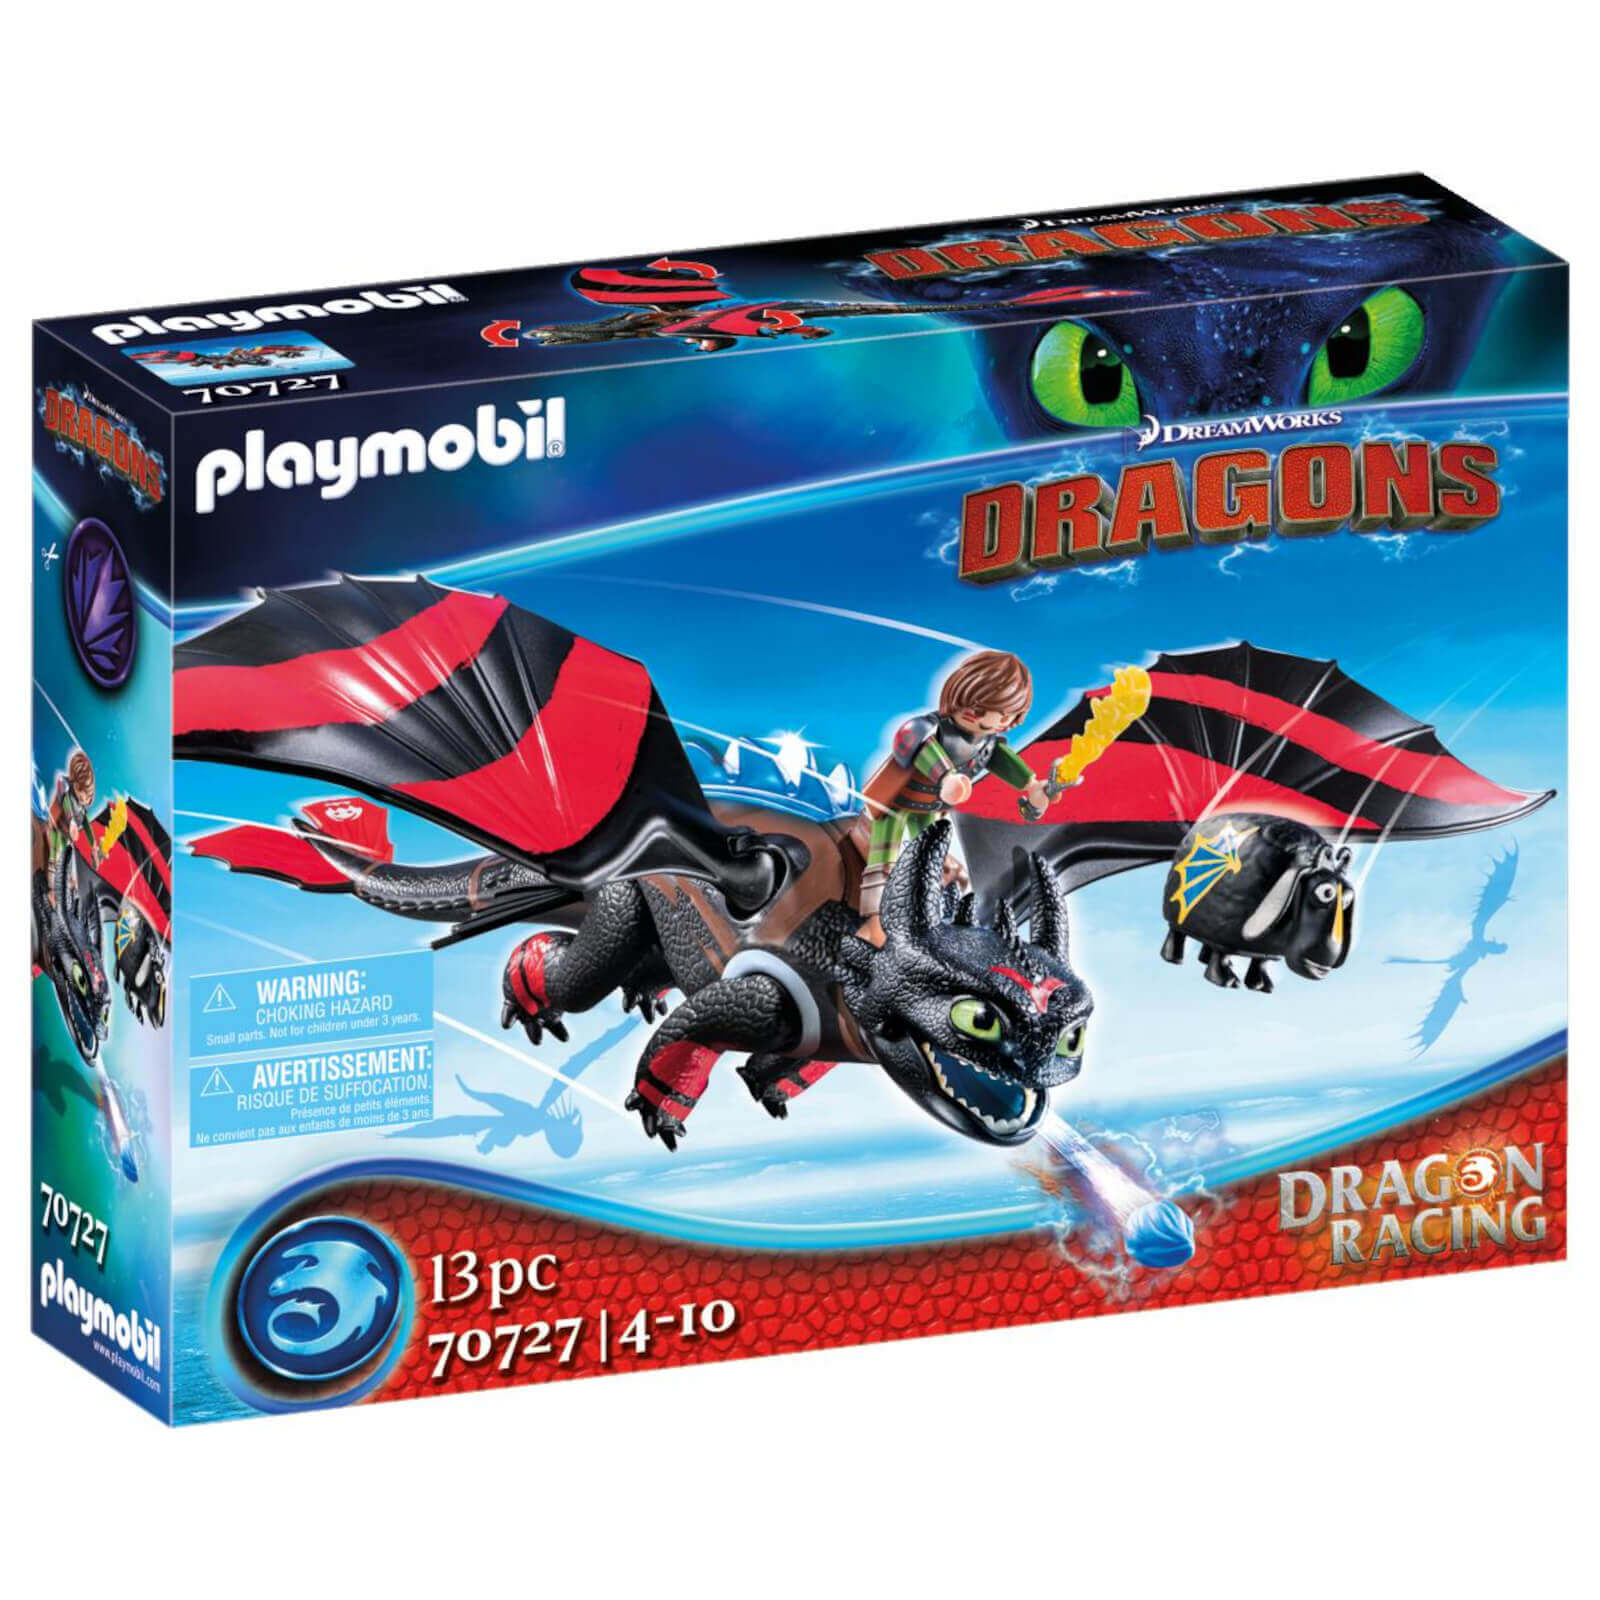 Playmobil Dragon Racing: Hiccup and Toothless (70727)